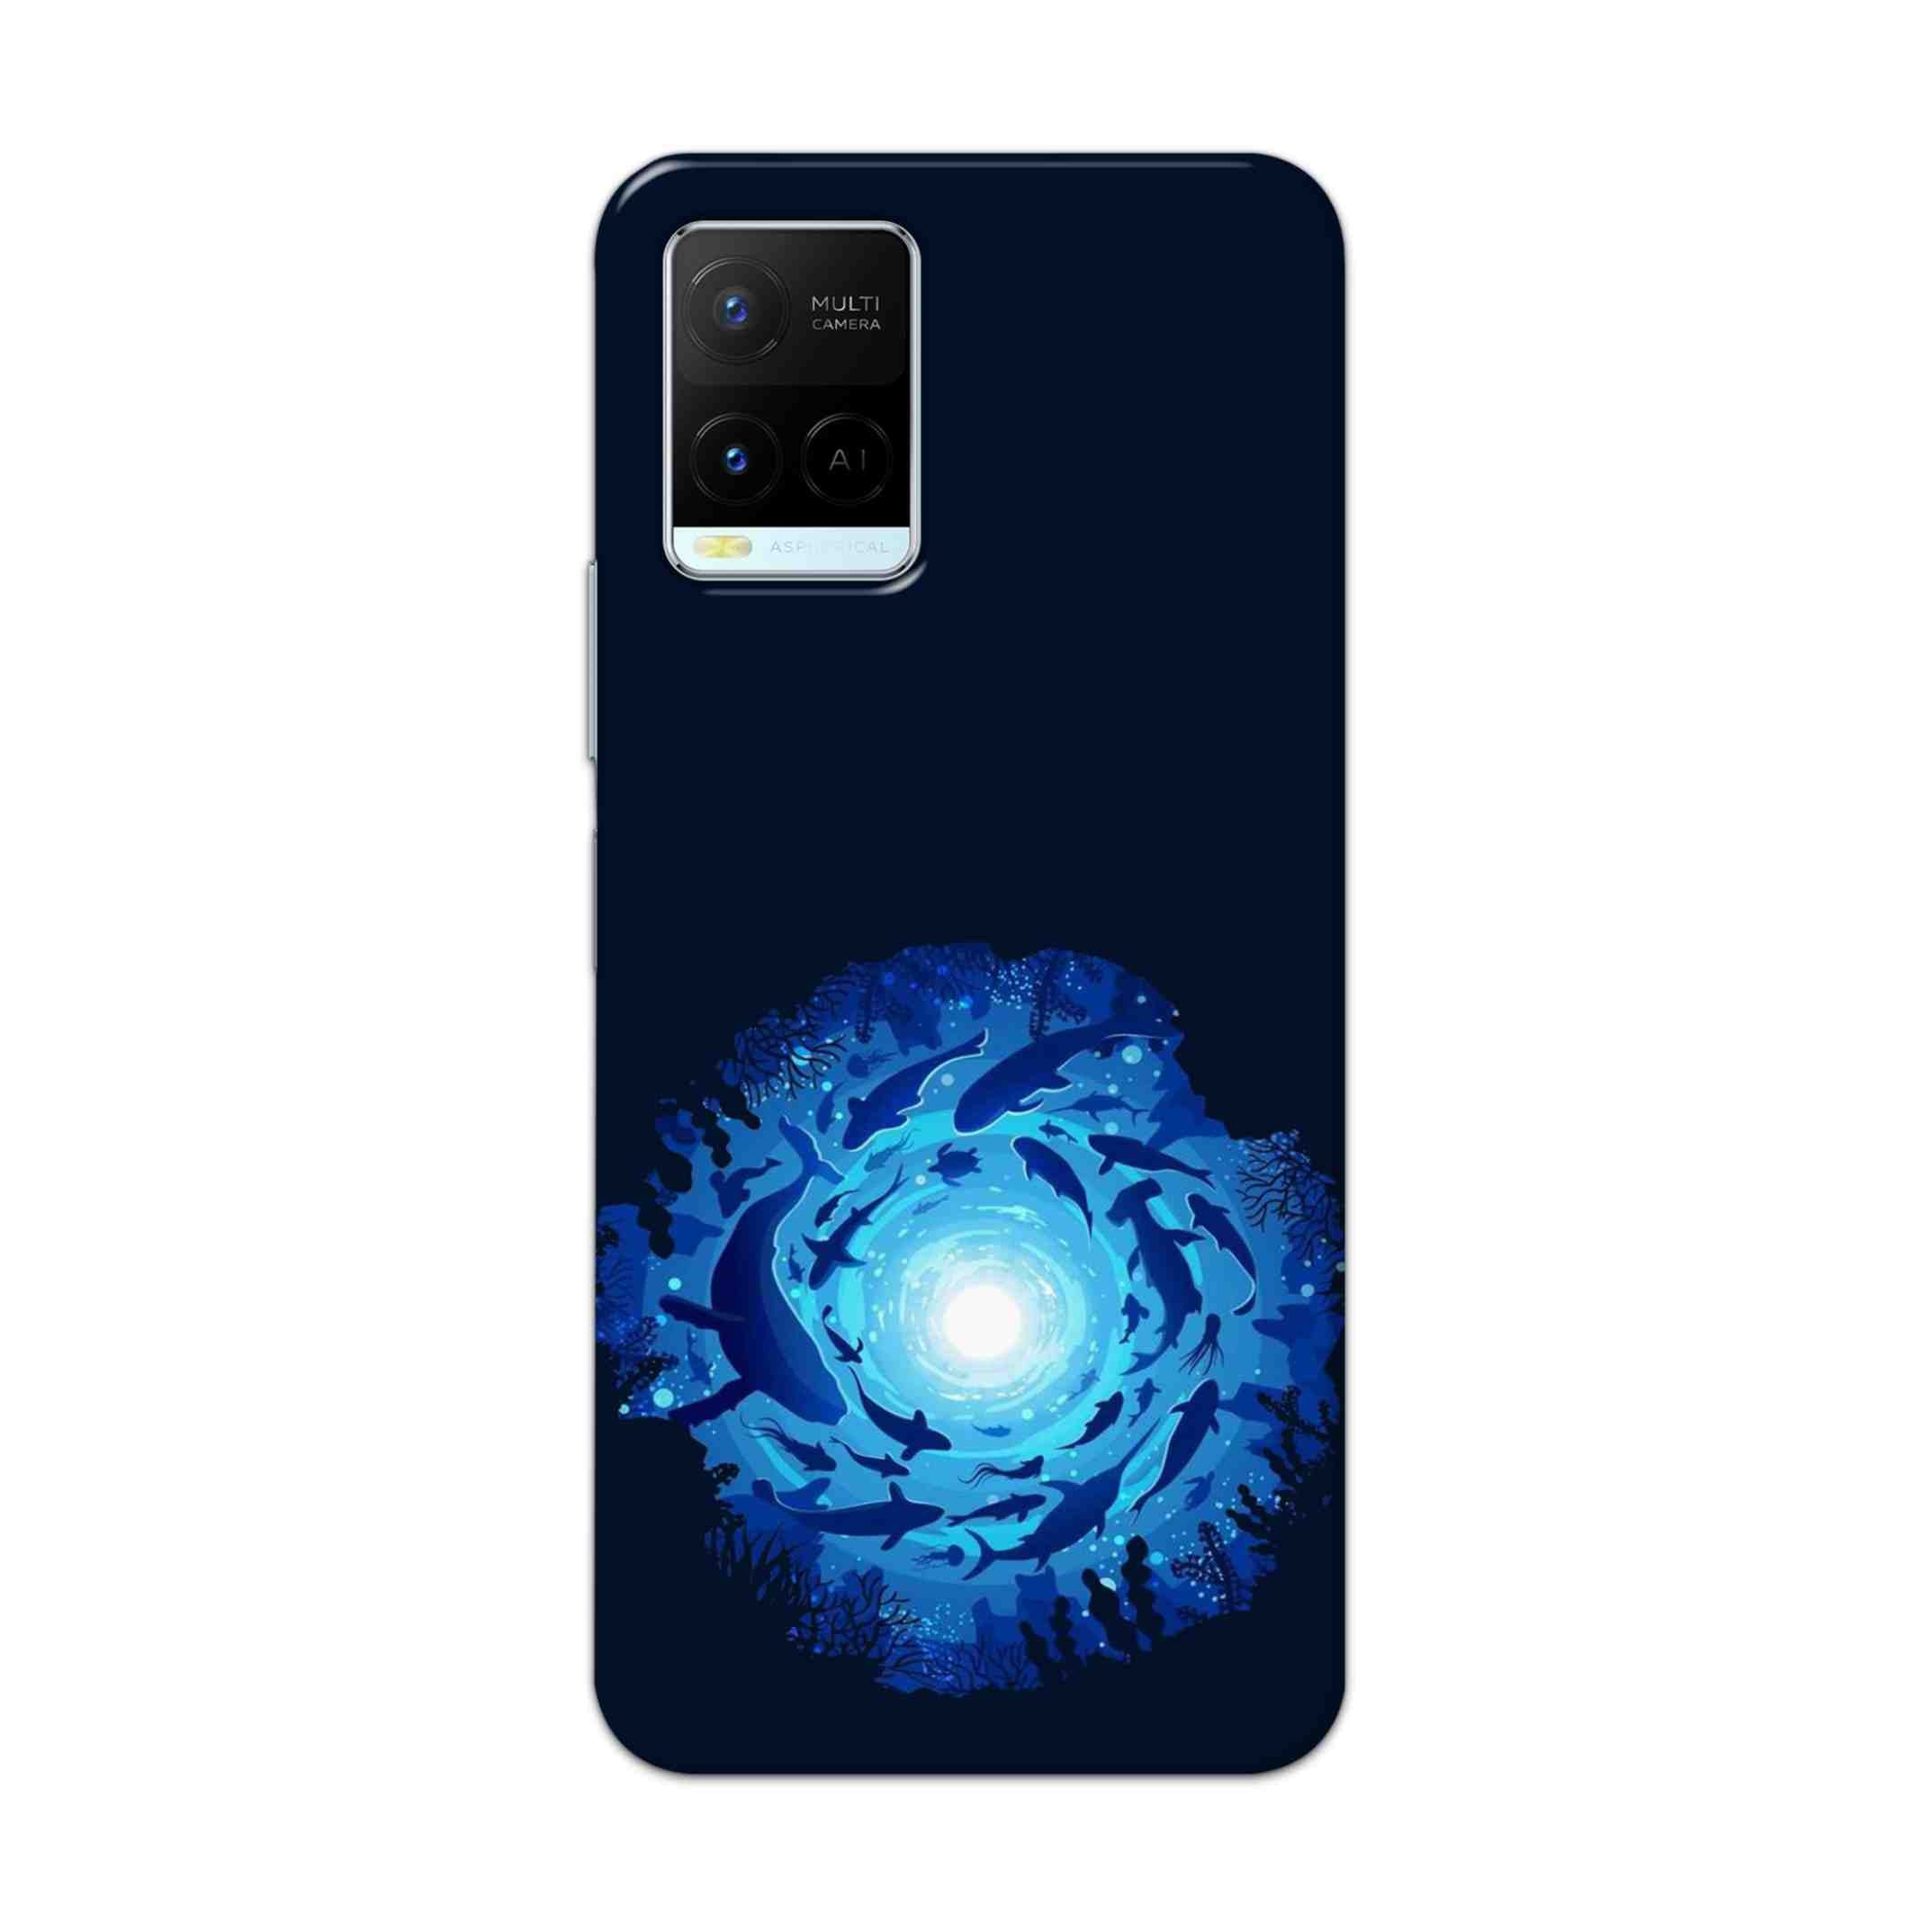 Buy Blue Whale Hard Back Mobile Phone Case Cover For Vivo Y21 2021 Online